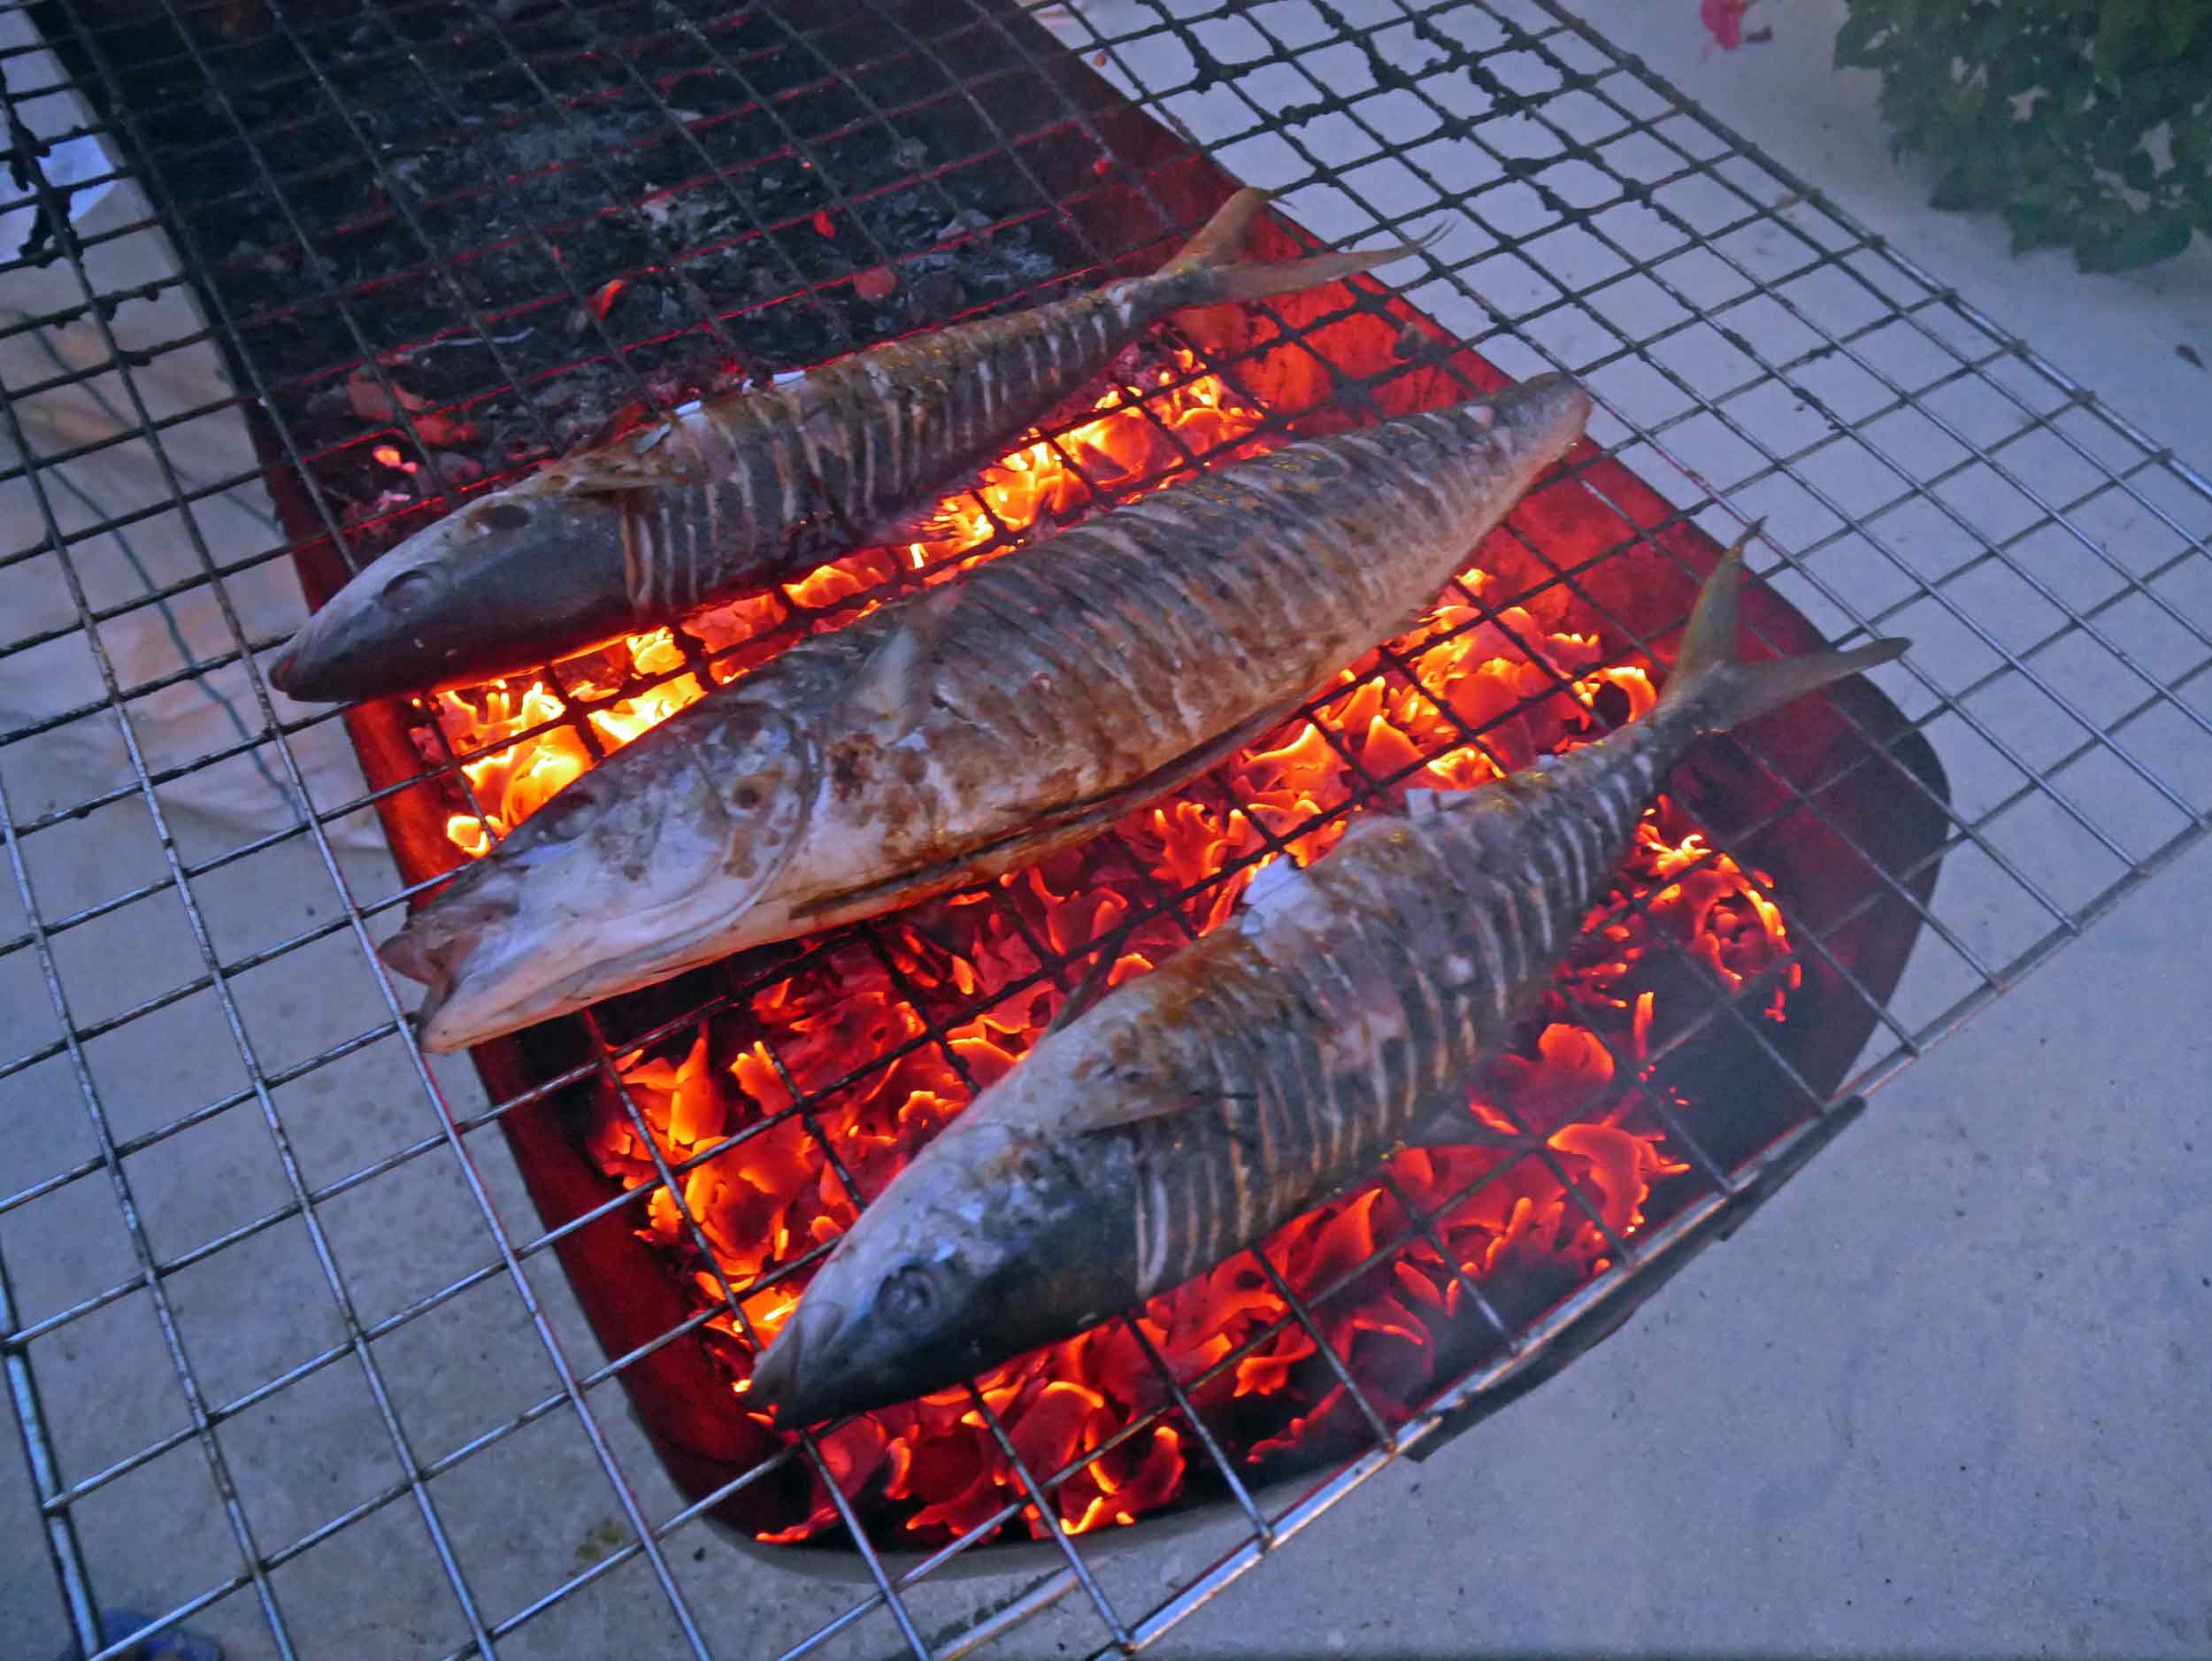  Grilled fresh caught fish for dinner?&nbsp; Yes, please!&nbsp; 